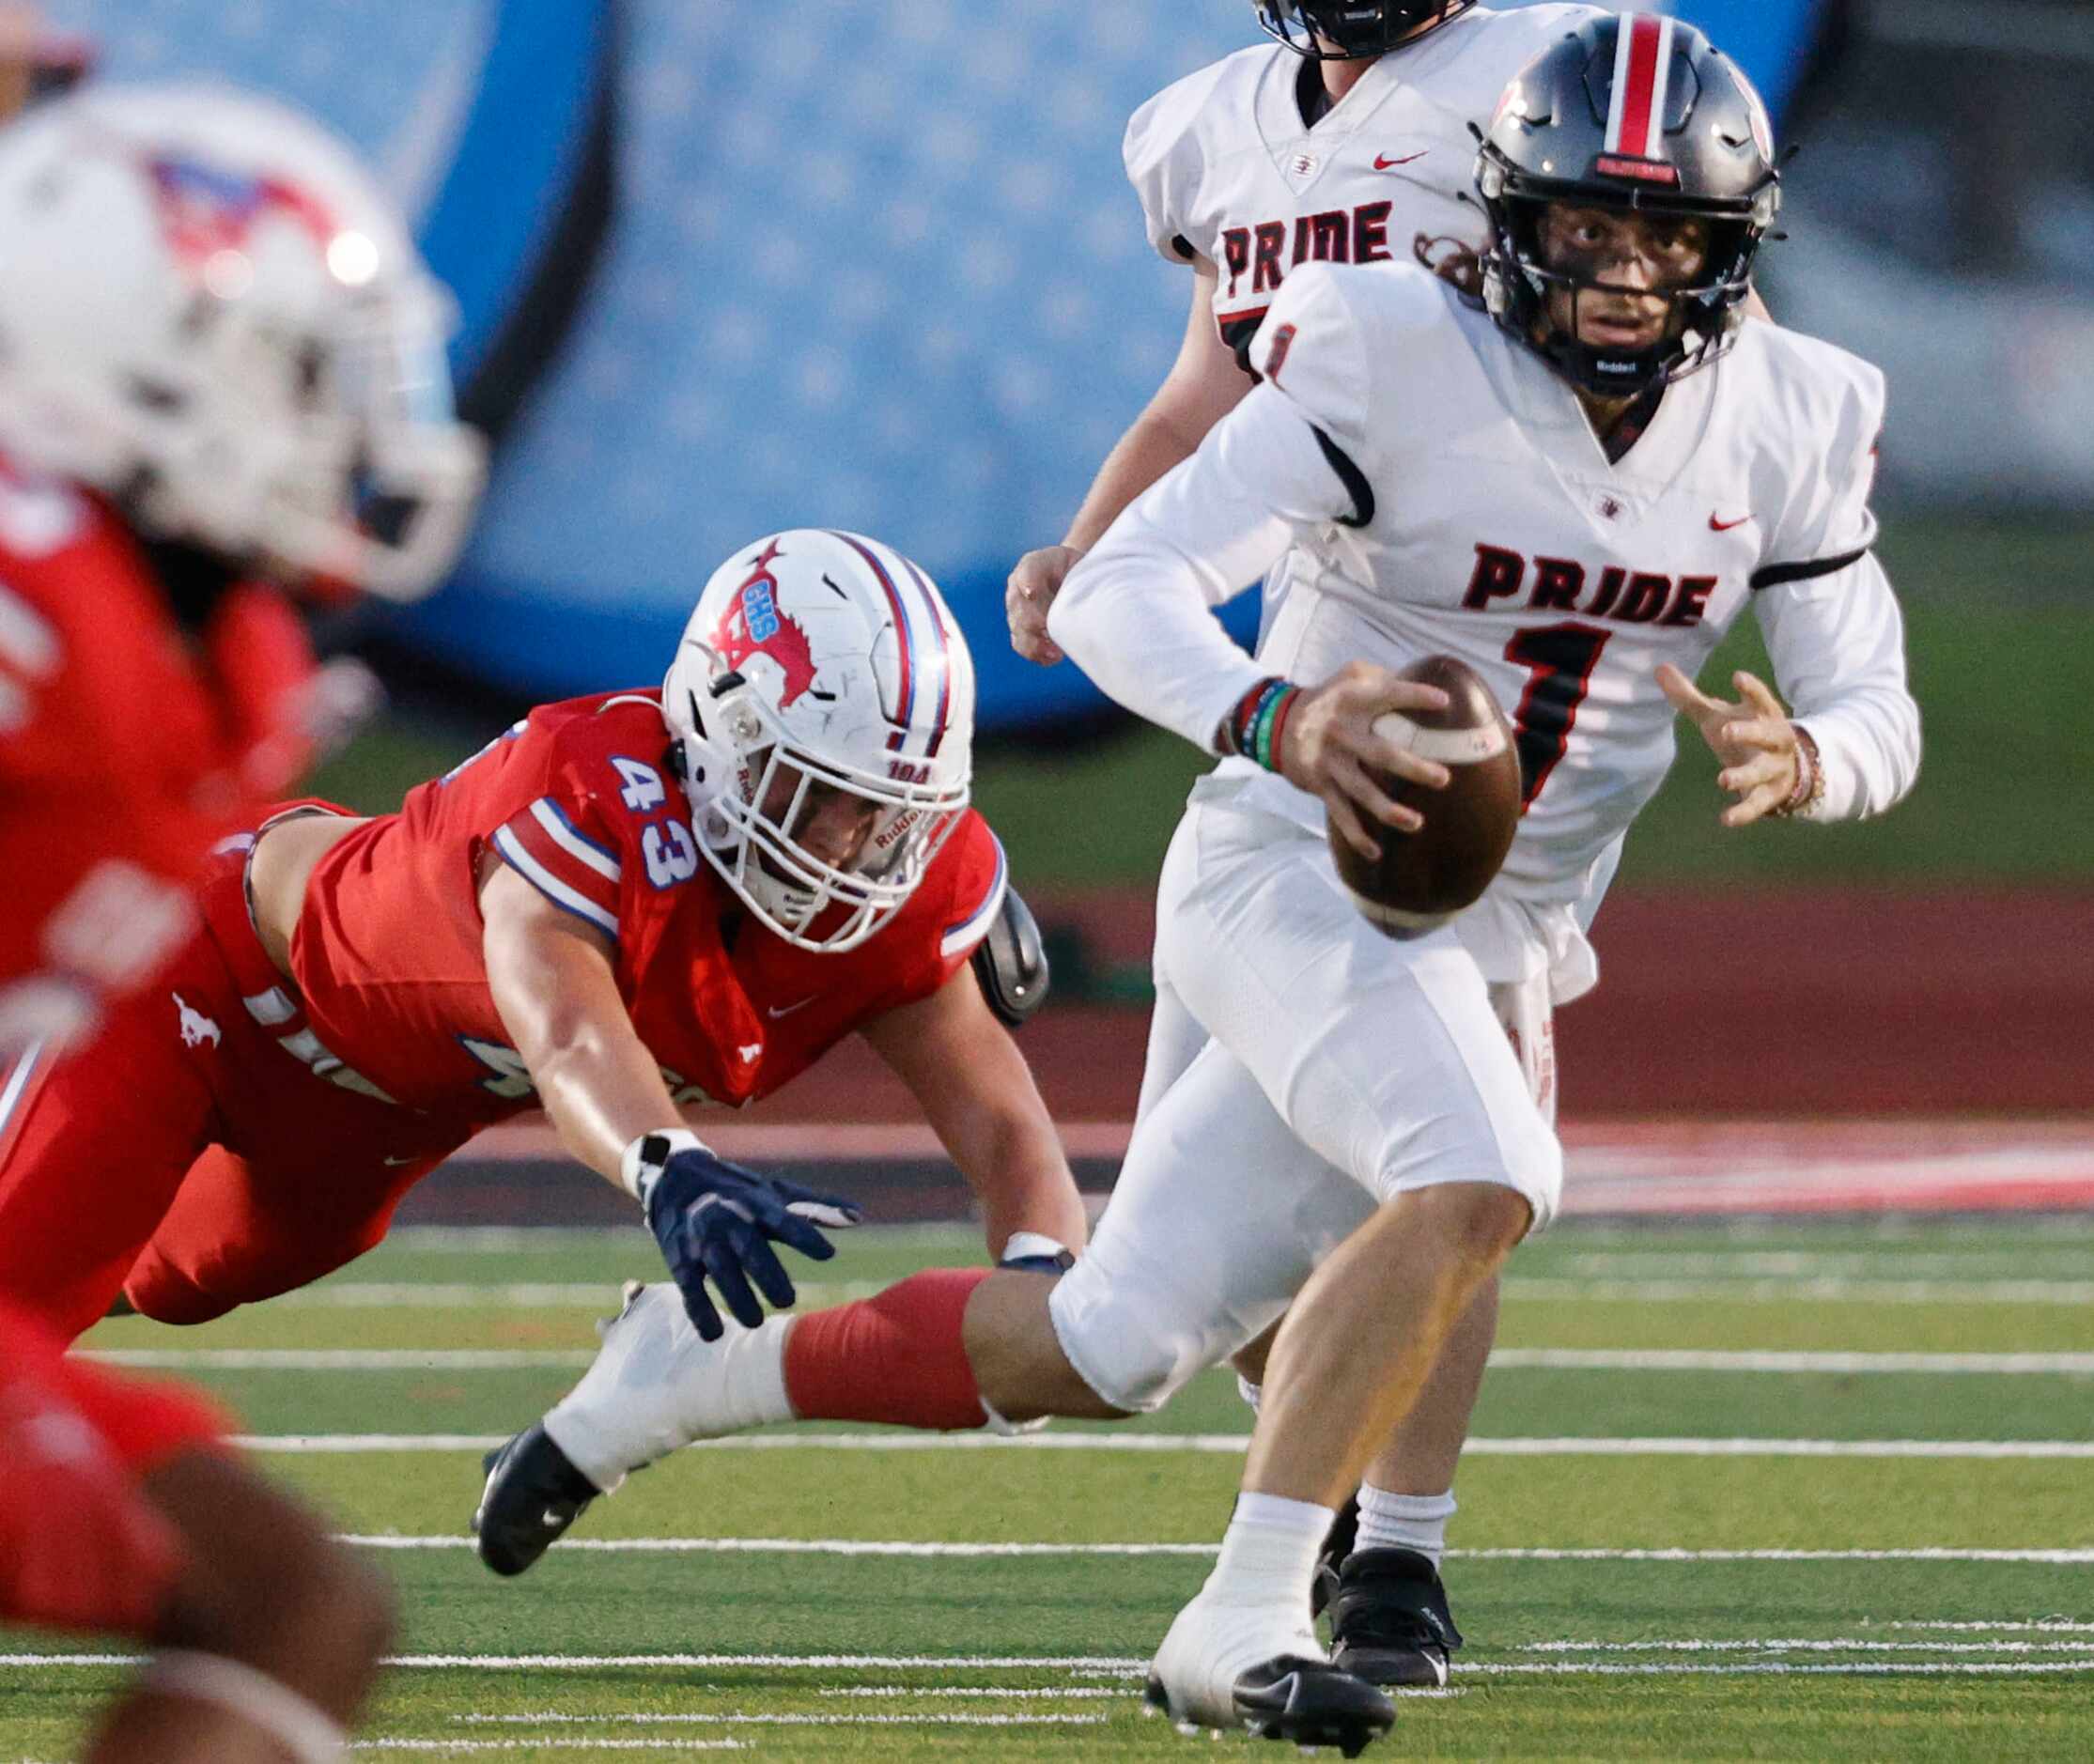 Colleyville Heritage's quarterback Luke Ullrich (1) looks to throw the ball under pressure...